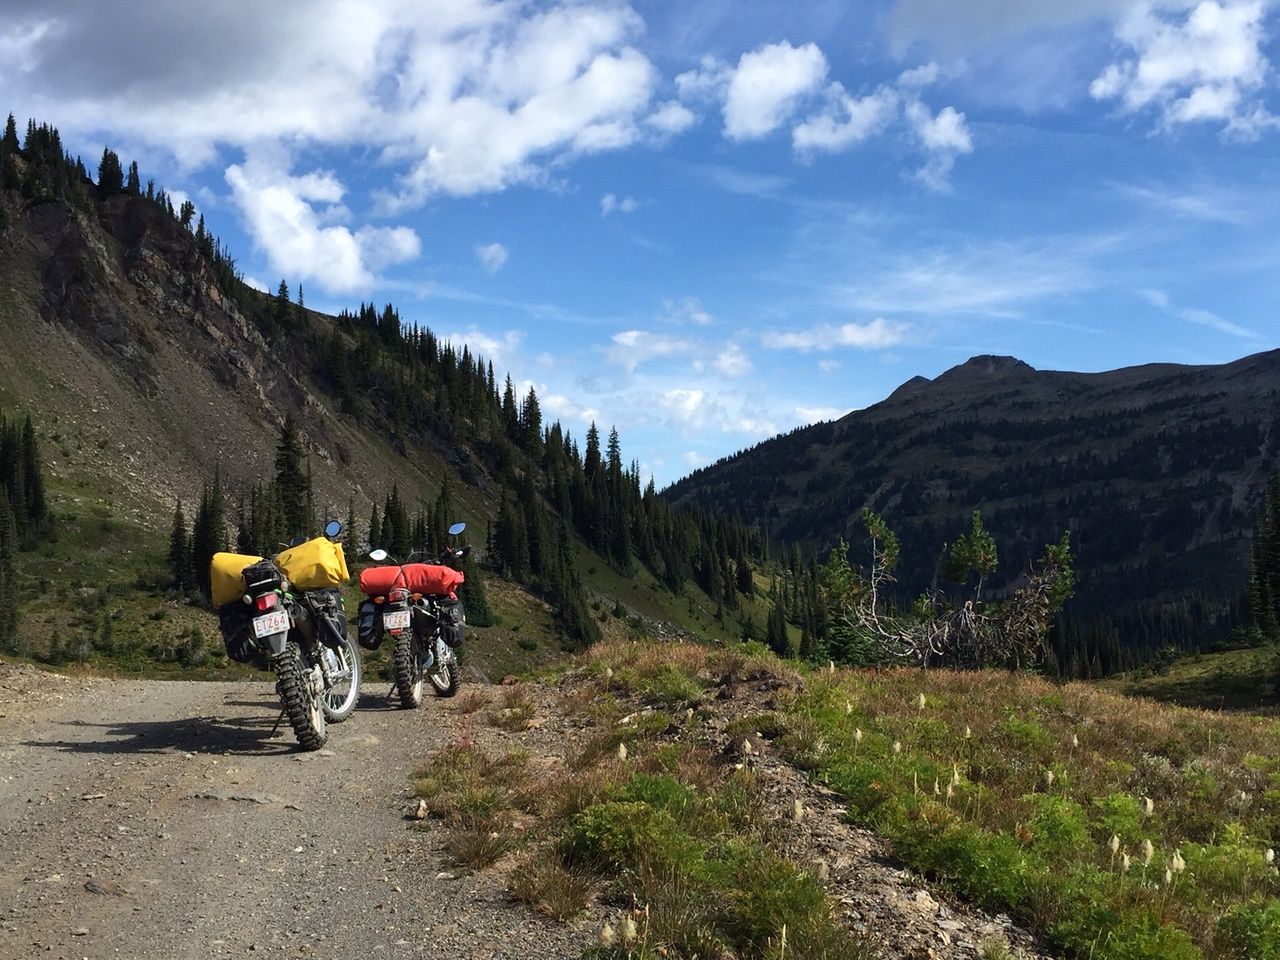 No shortage of great rides in the Kootnays